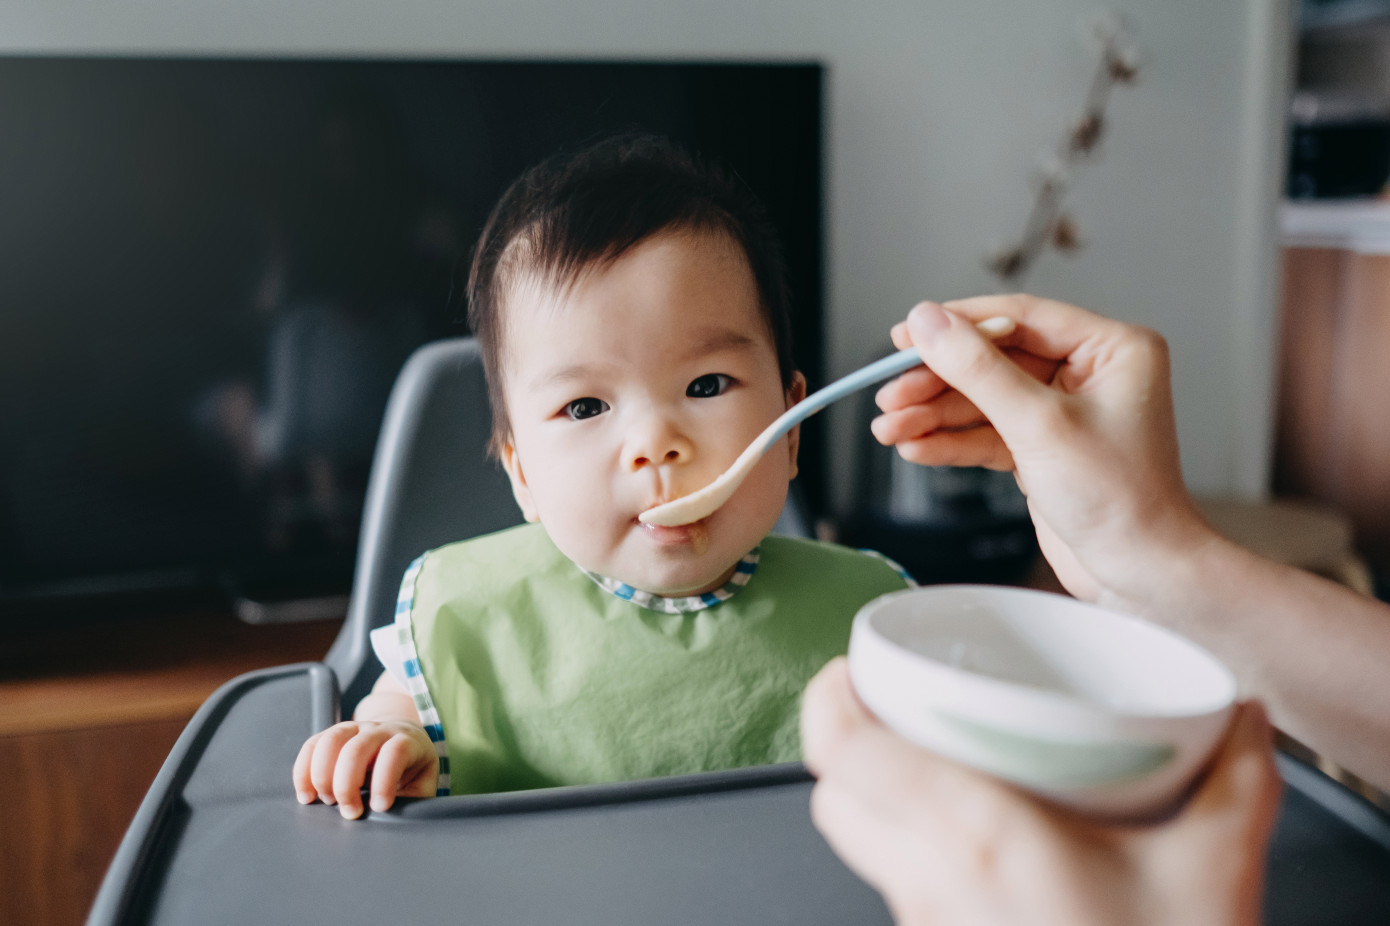 Baby food delivery startup Yumi spoon fed another $8M in strategic funding